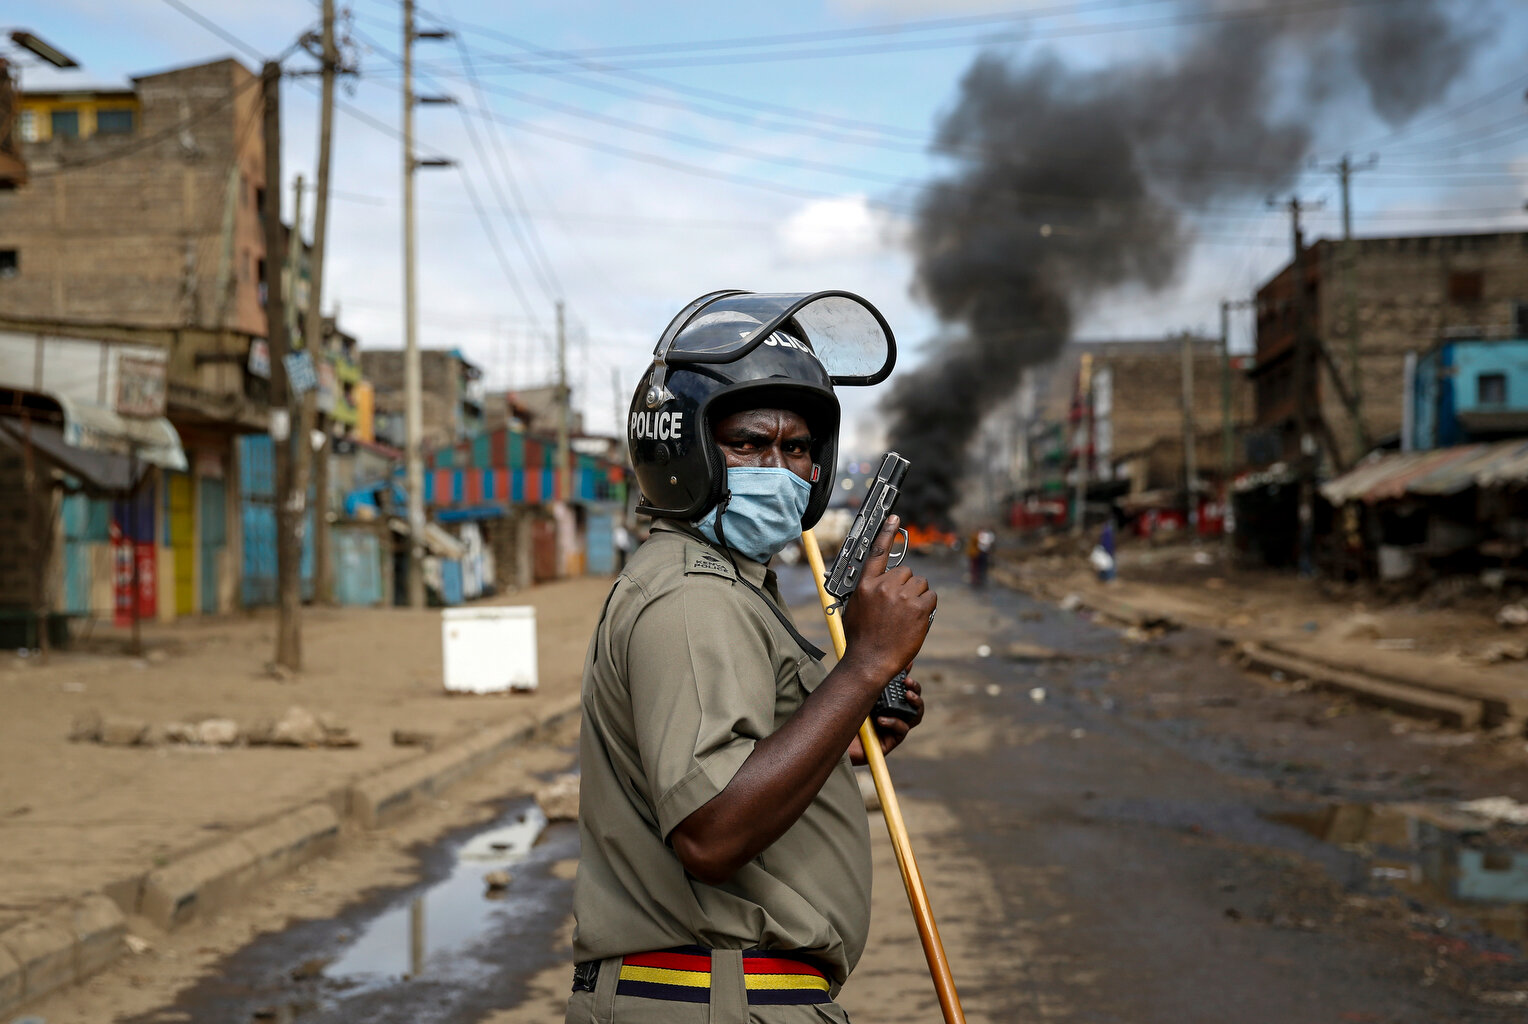  A police officer holds a pistol during clashes with protesters near a burning tyre barricade in the Kariobangi slum of Nairobi, Kenya Friday, May 8, 2020. (AP Photo/Brian Inganga) 